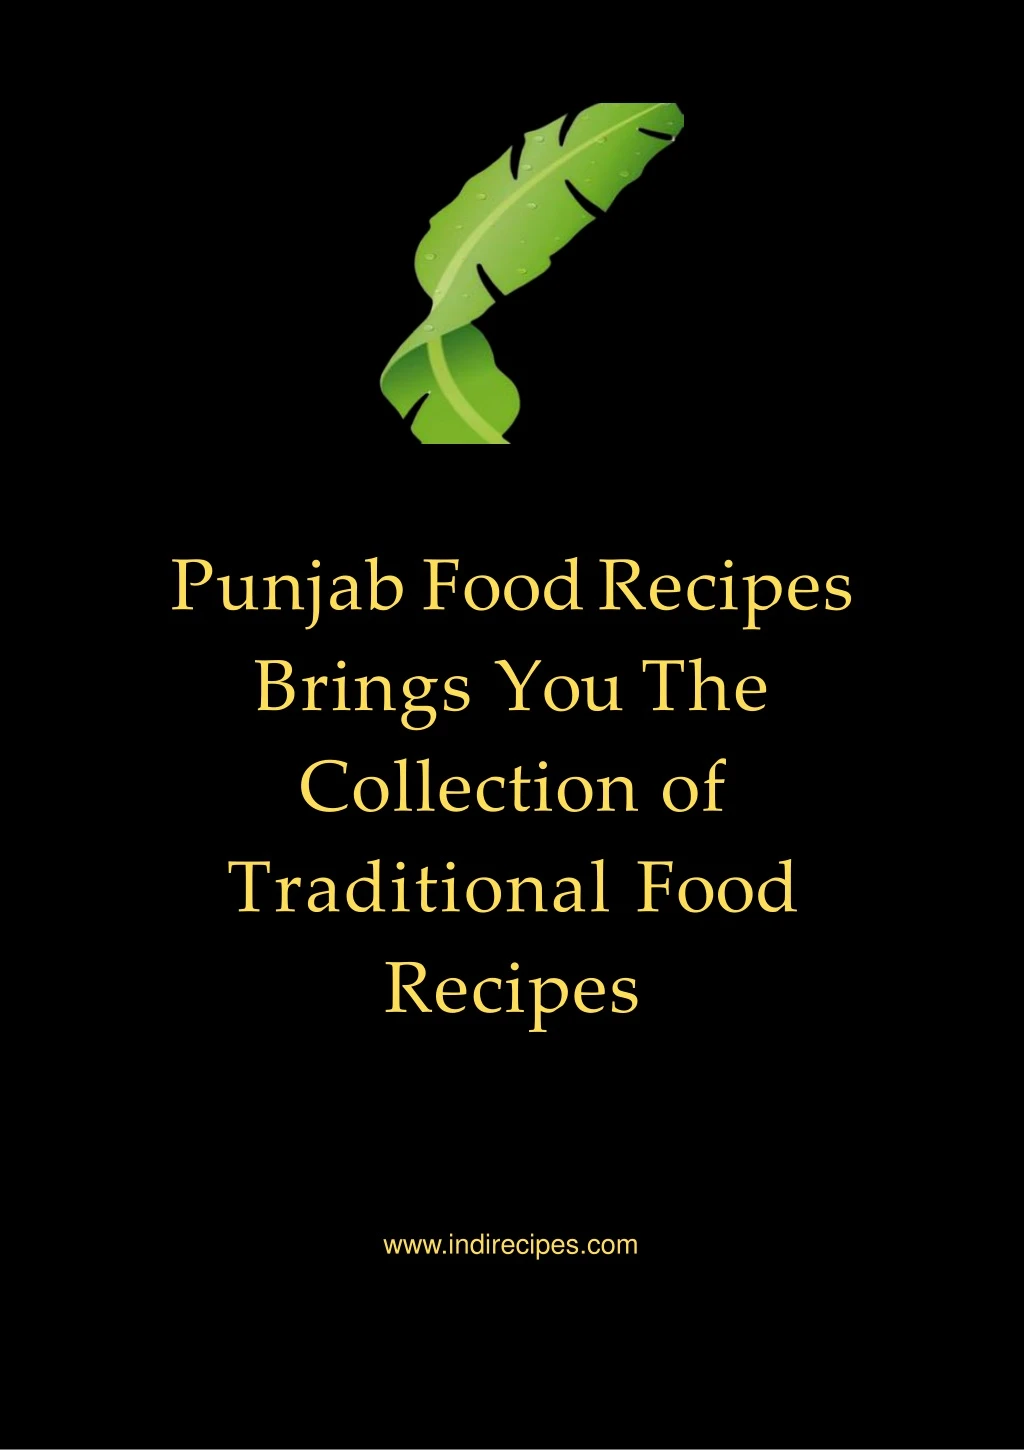 punjab food recipes brings you the collection of traditional food recipes